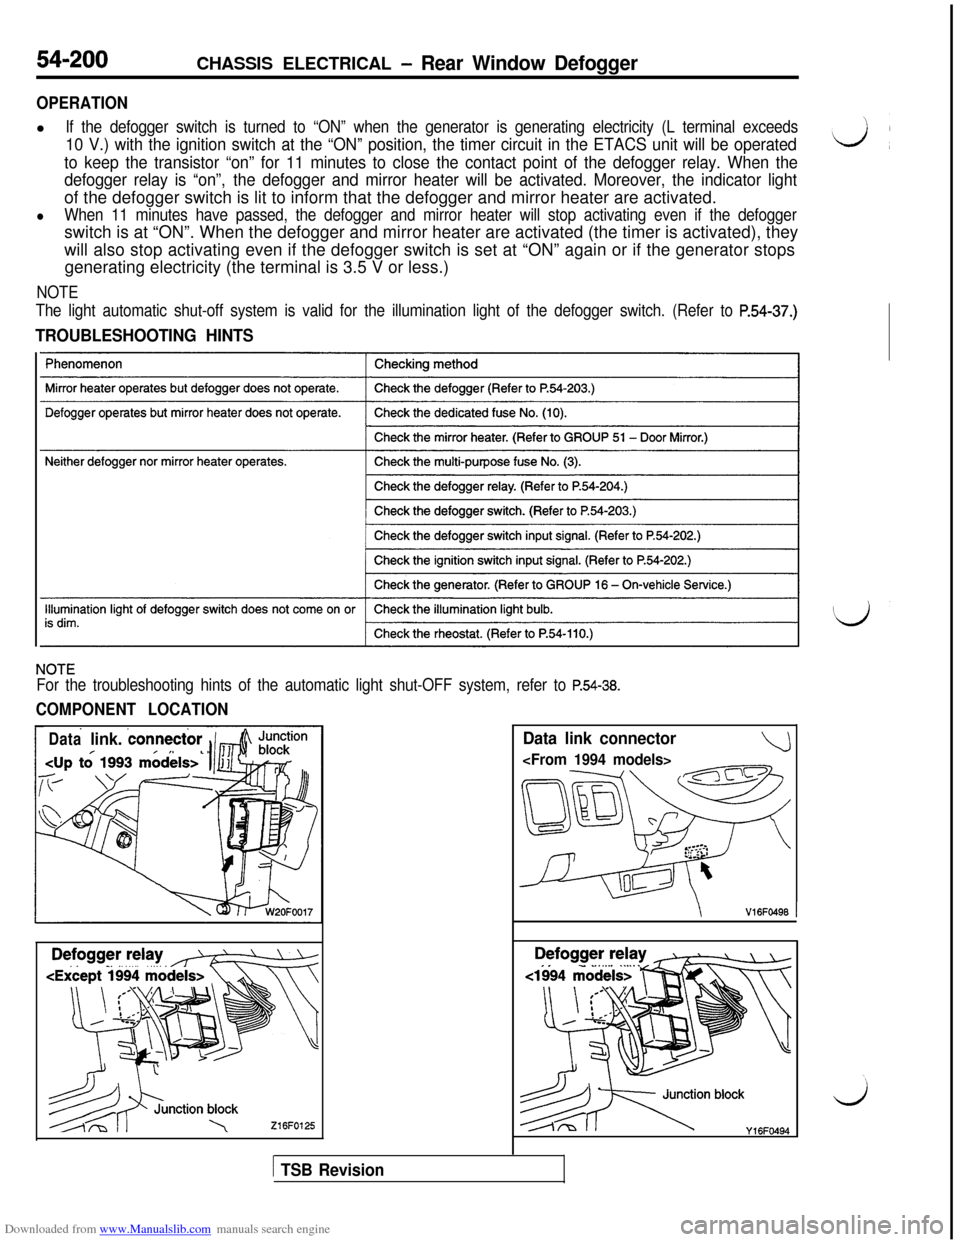 MITSUBISHI 3000GT 1994 2.G Workshop Manual Downloaded from www.Manualslib.com manuals search engine 54-200CHASSIS ELECTRICAL - Rear Window Defogger
OPERATIONl
If the defogger switch is turned to “ON” when the generator is generating electr